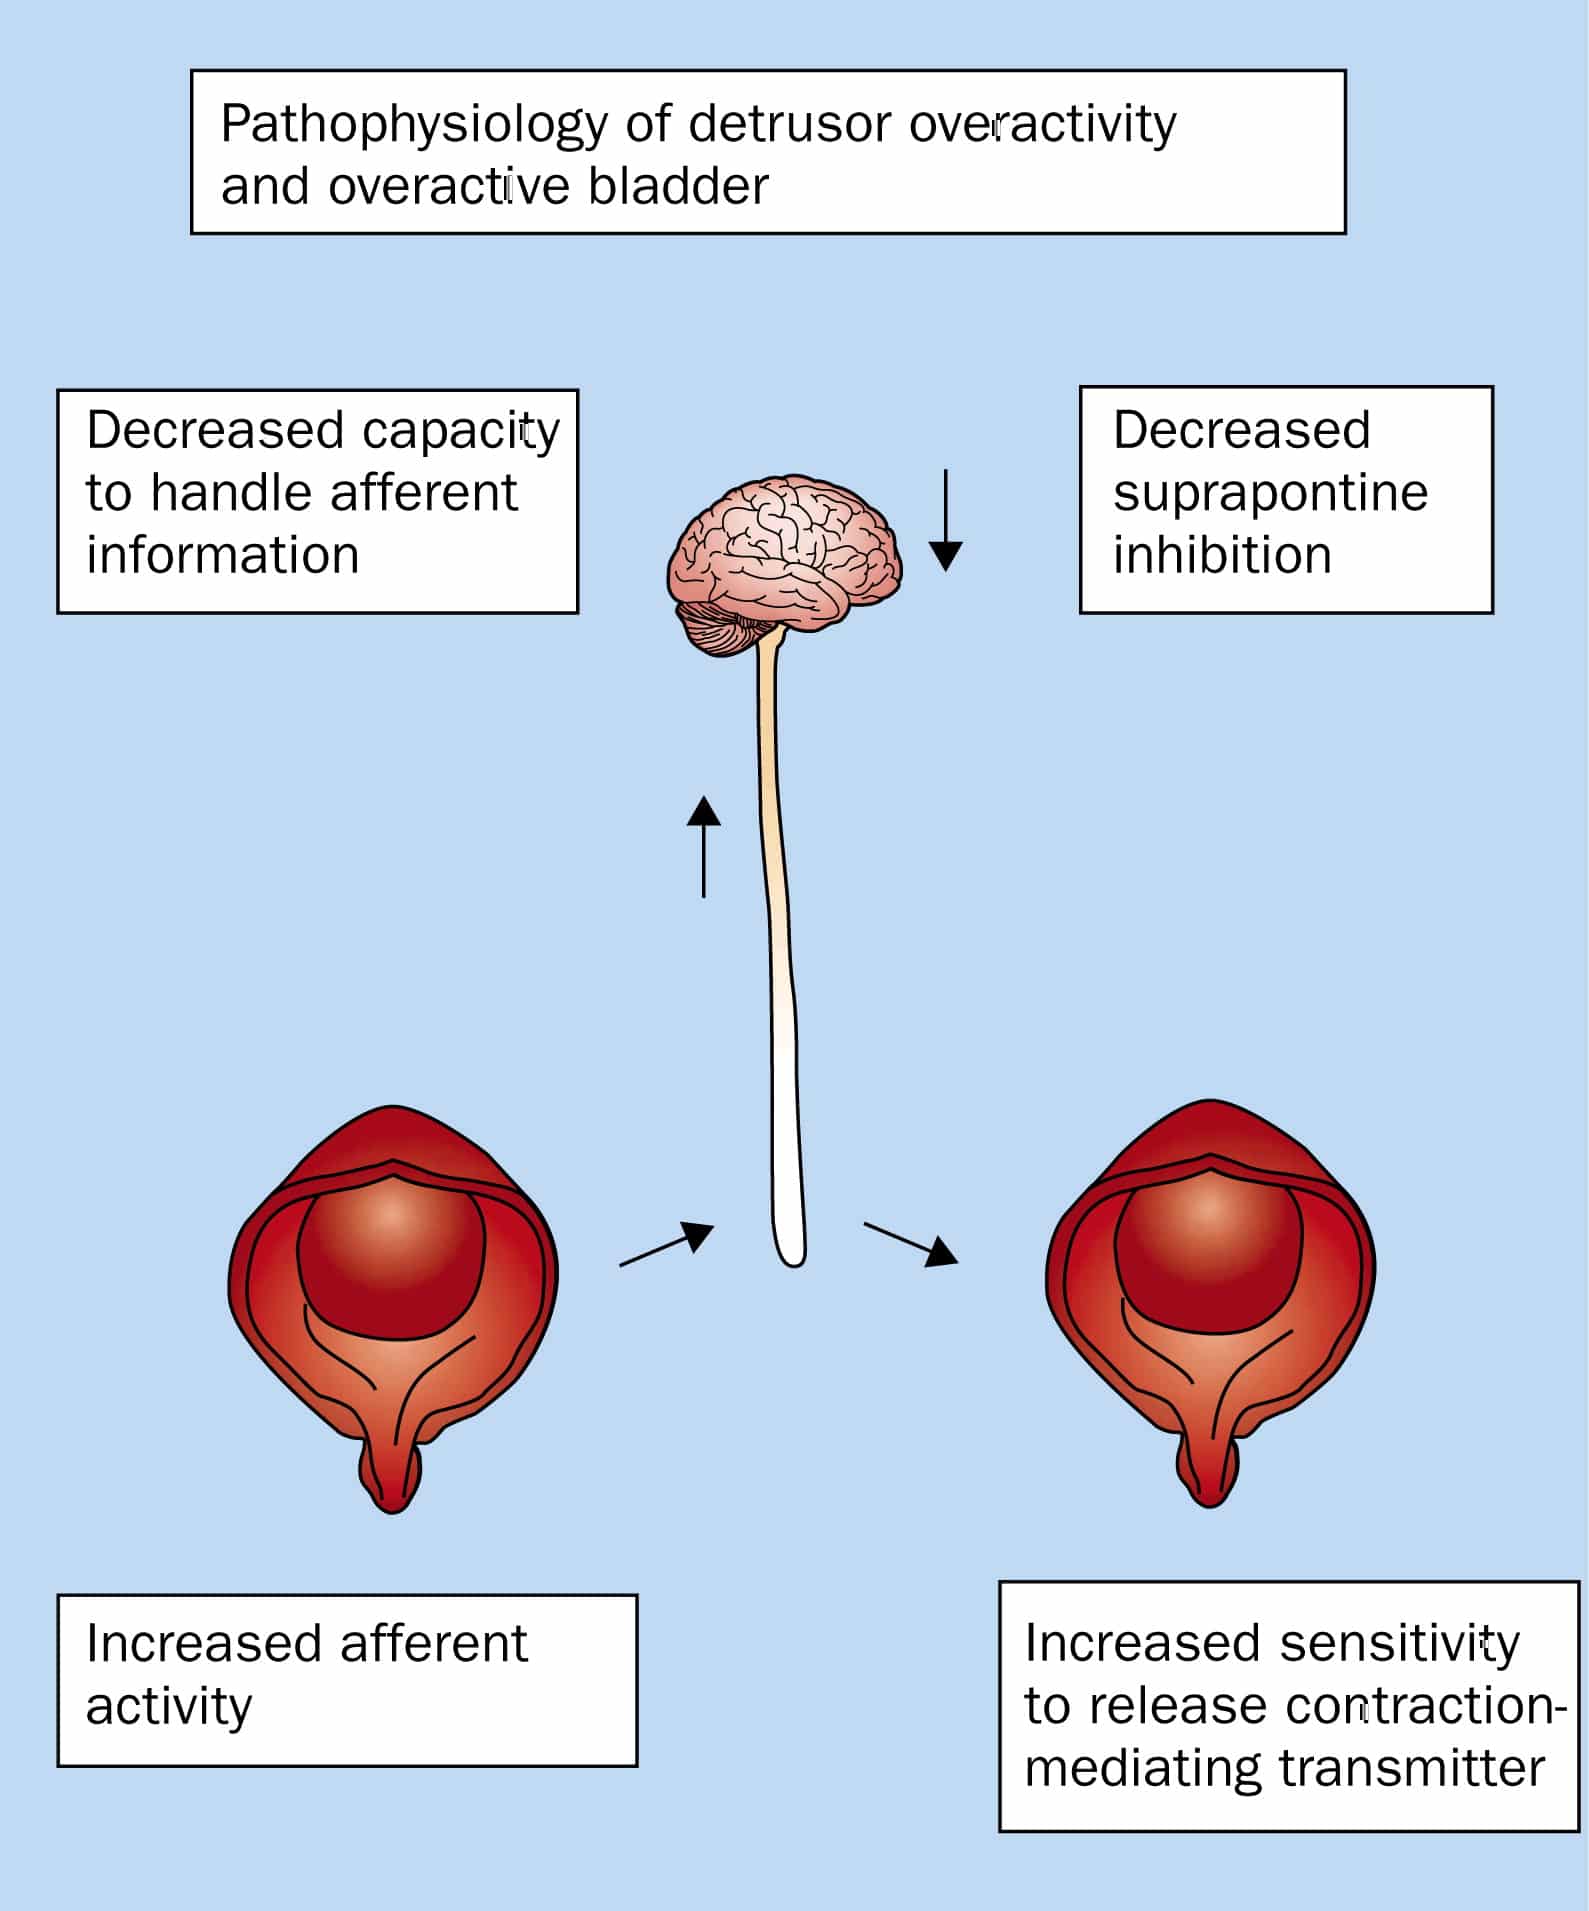 Antimuscarinics for treatment of overactive bladder